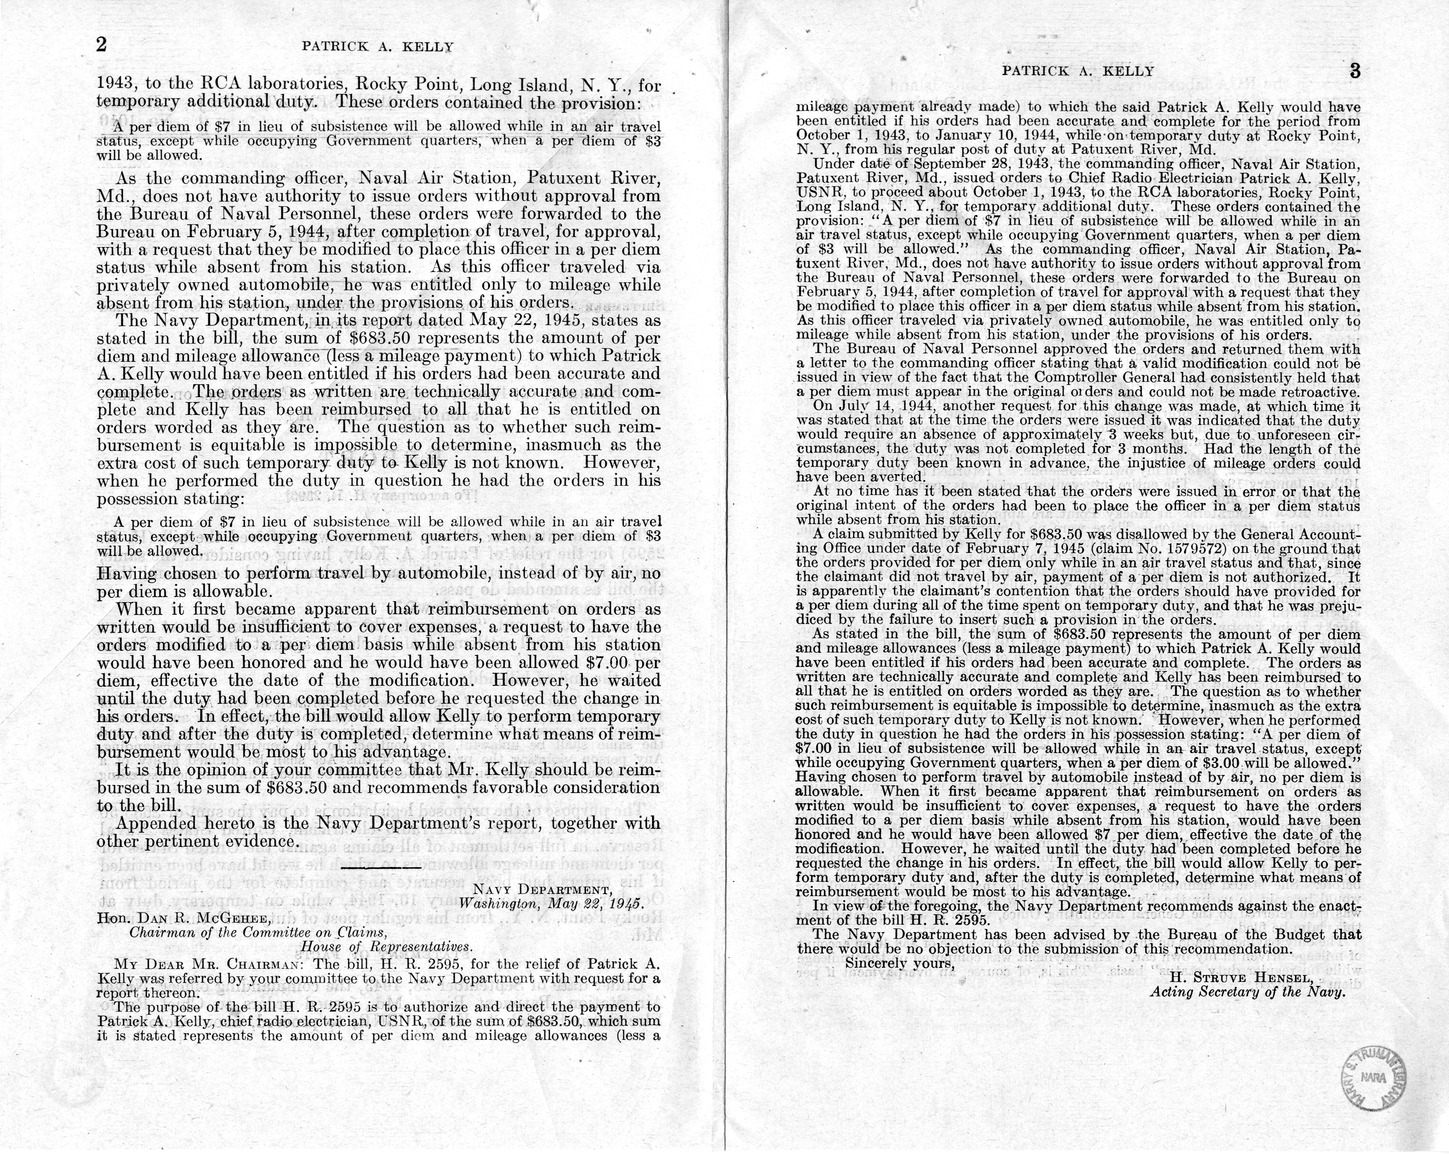 Memorandum from Frederick J. Bailey to M. C. Latta, H.R. 2595, For the Relief of Patrick A. Kelly, with Attachments